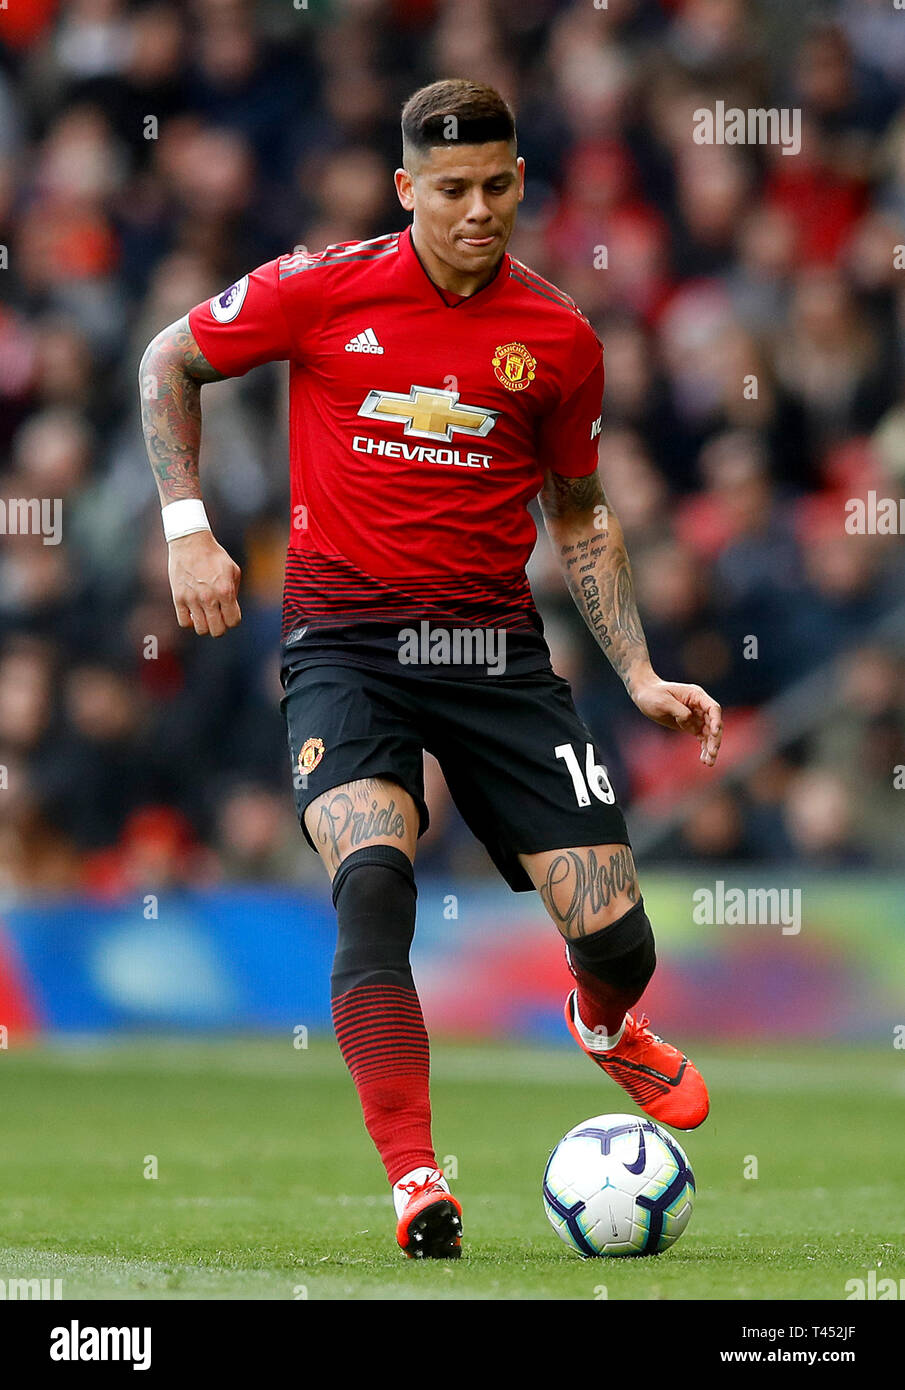 Manchester United's Marcos Rojo during the Premier League match at Old Trafford, Manchester. Stock Photo